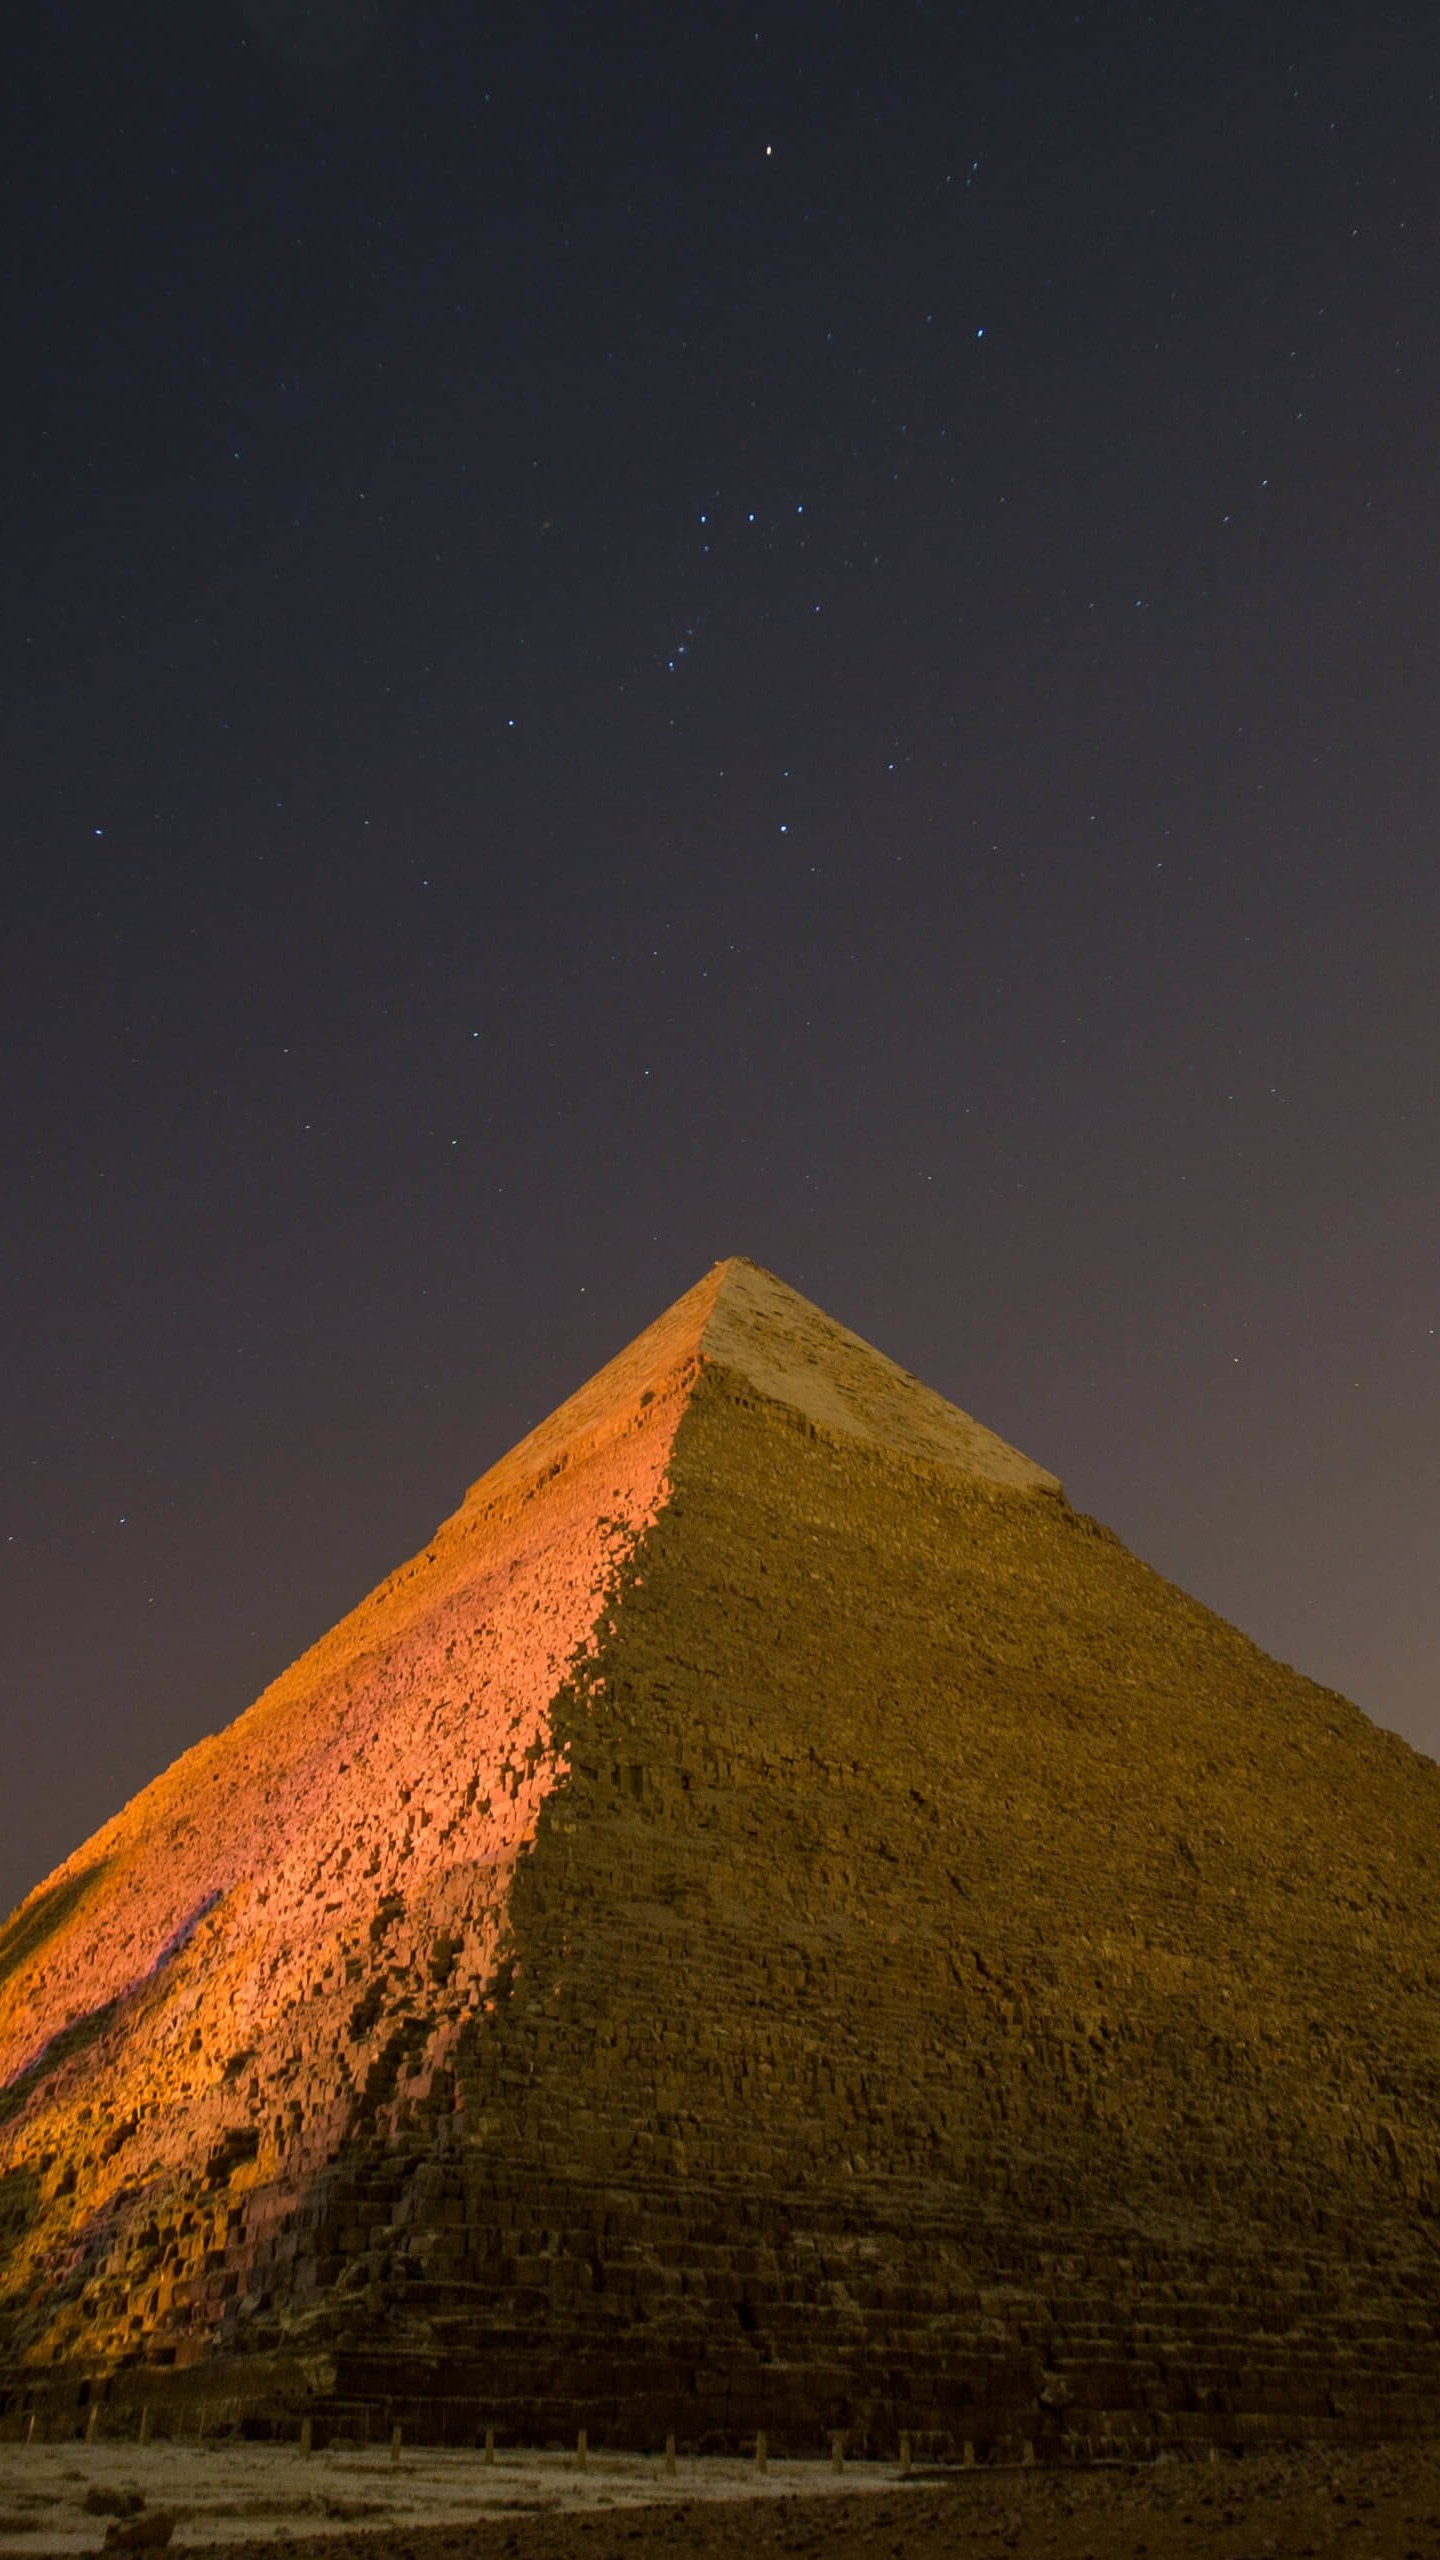 Pyramid by Night Wallpaper for SAMSUNG Galaxy S6